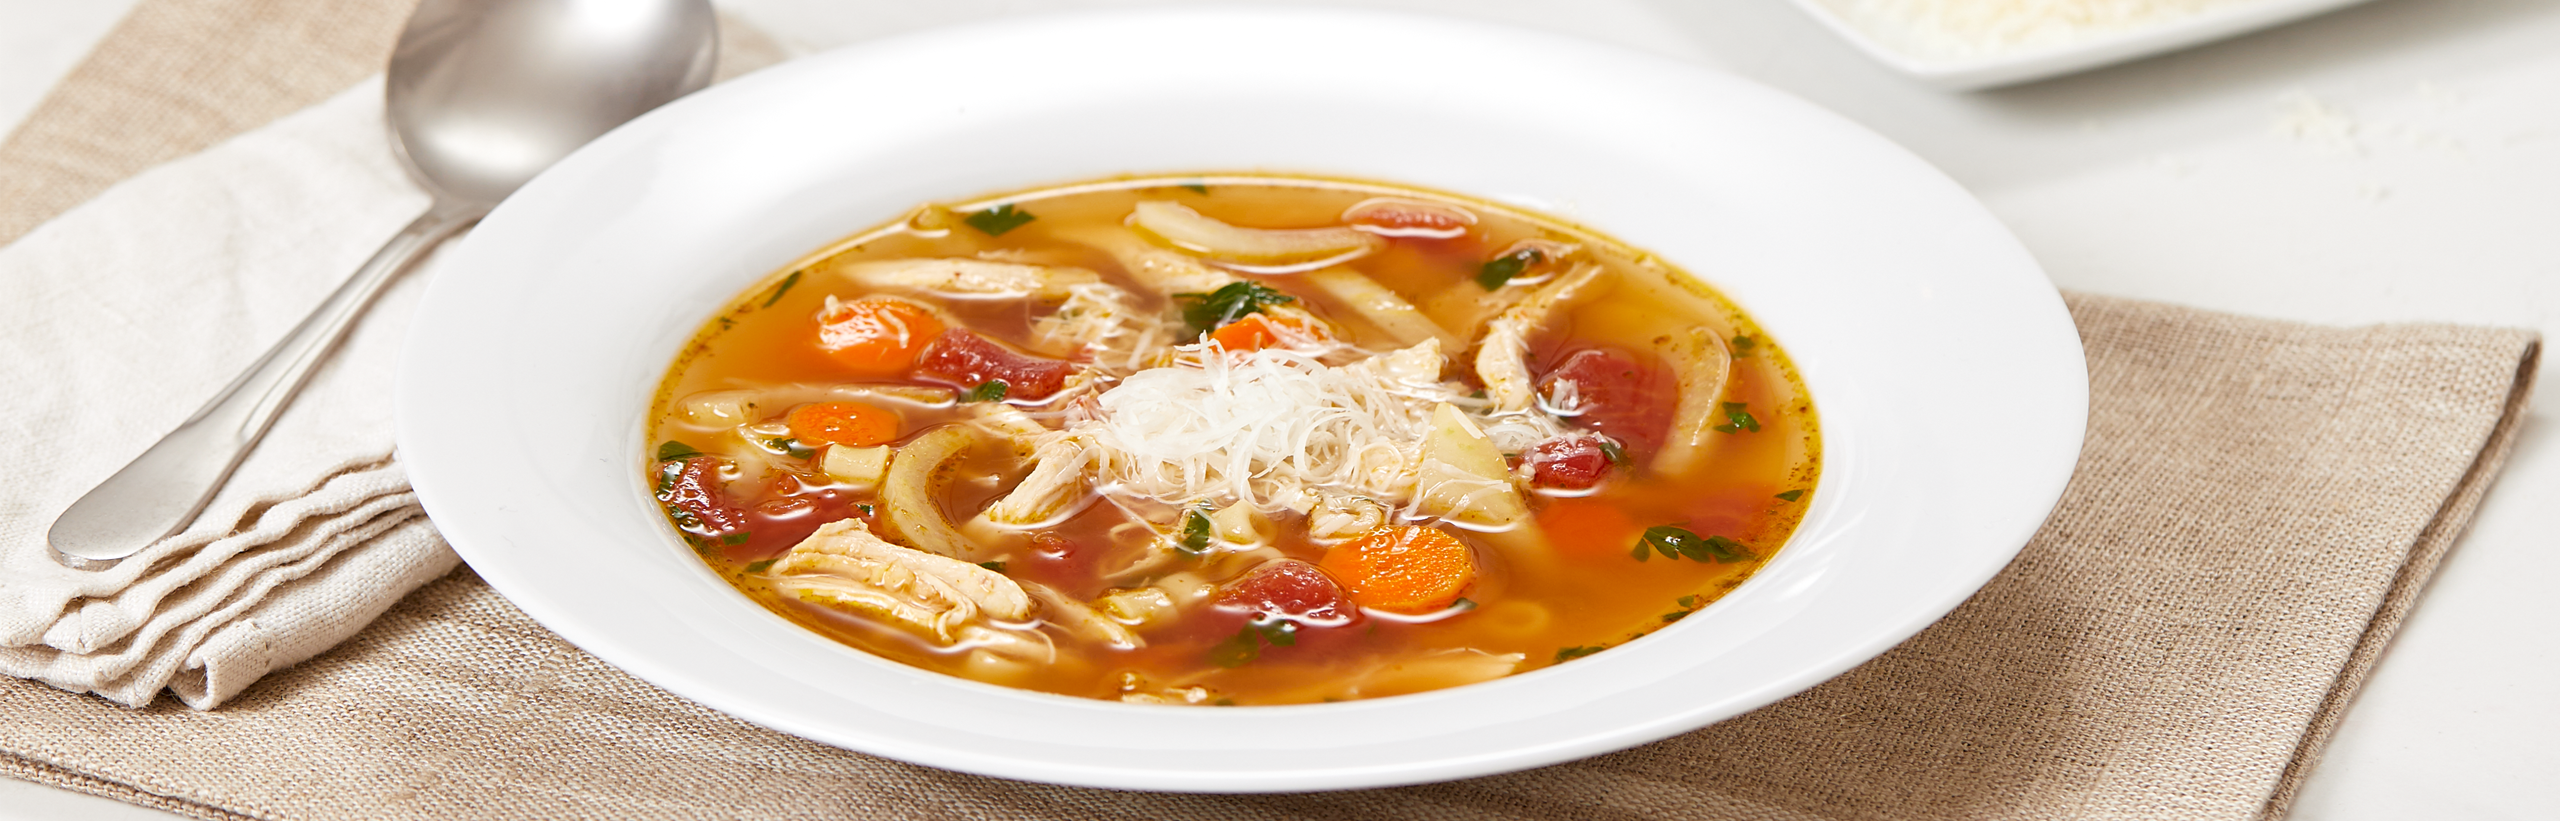 https://www.campbells.com/swanson/wp-content/uploads/2020/10/Italian-Style-Chicken-Noodle-Soup-Featured-V2.png